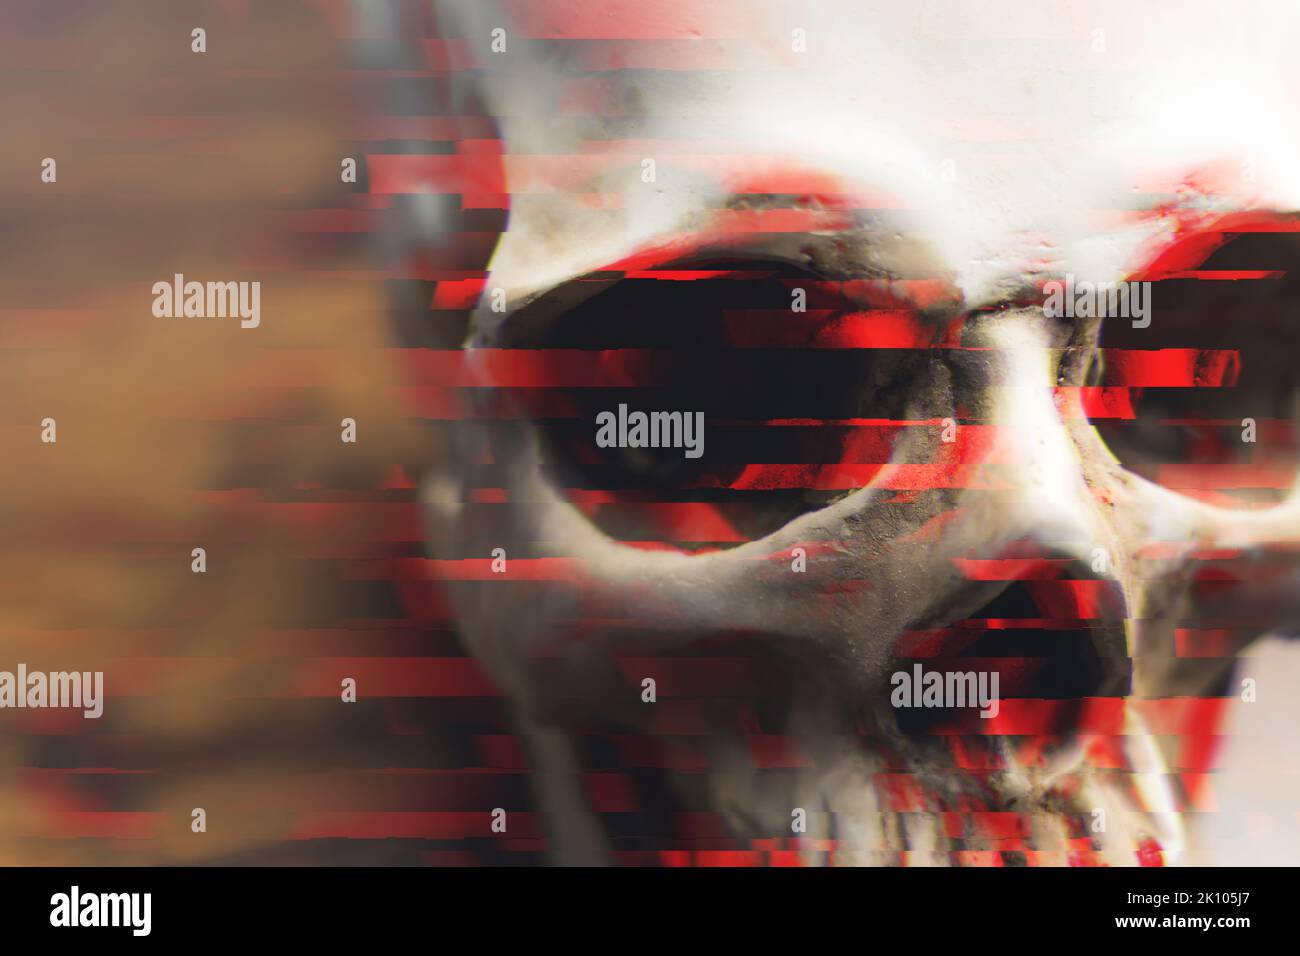 Red chromatic aberration effect used on white human skull illustration. Human anatomy. Blurred background. Death concept. High quality photo Stock Photo